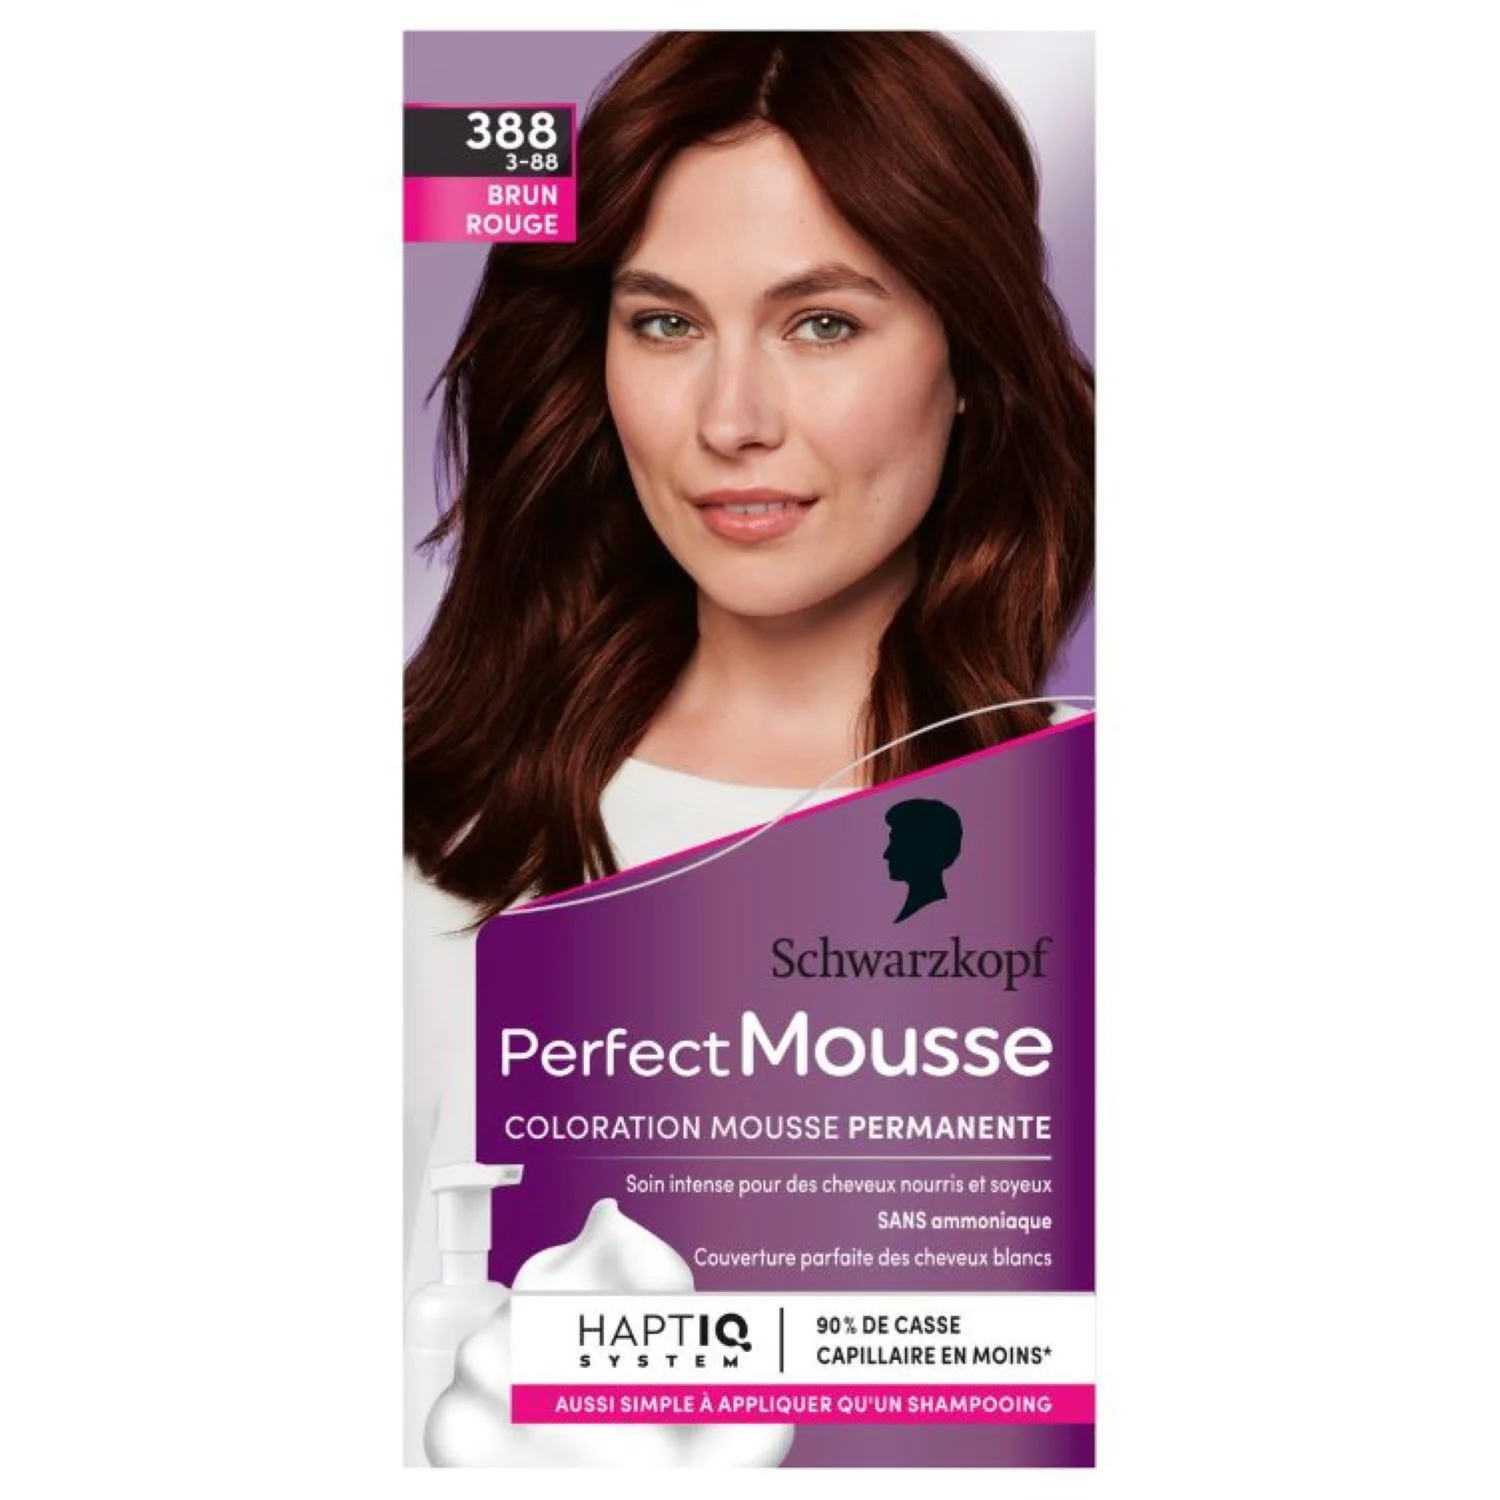 388 Brun Rouge Perfect Mousse